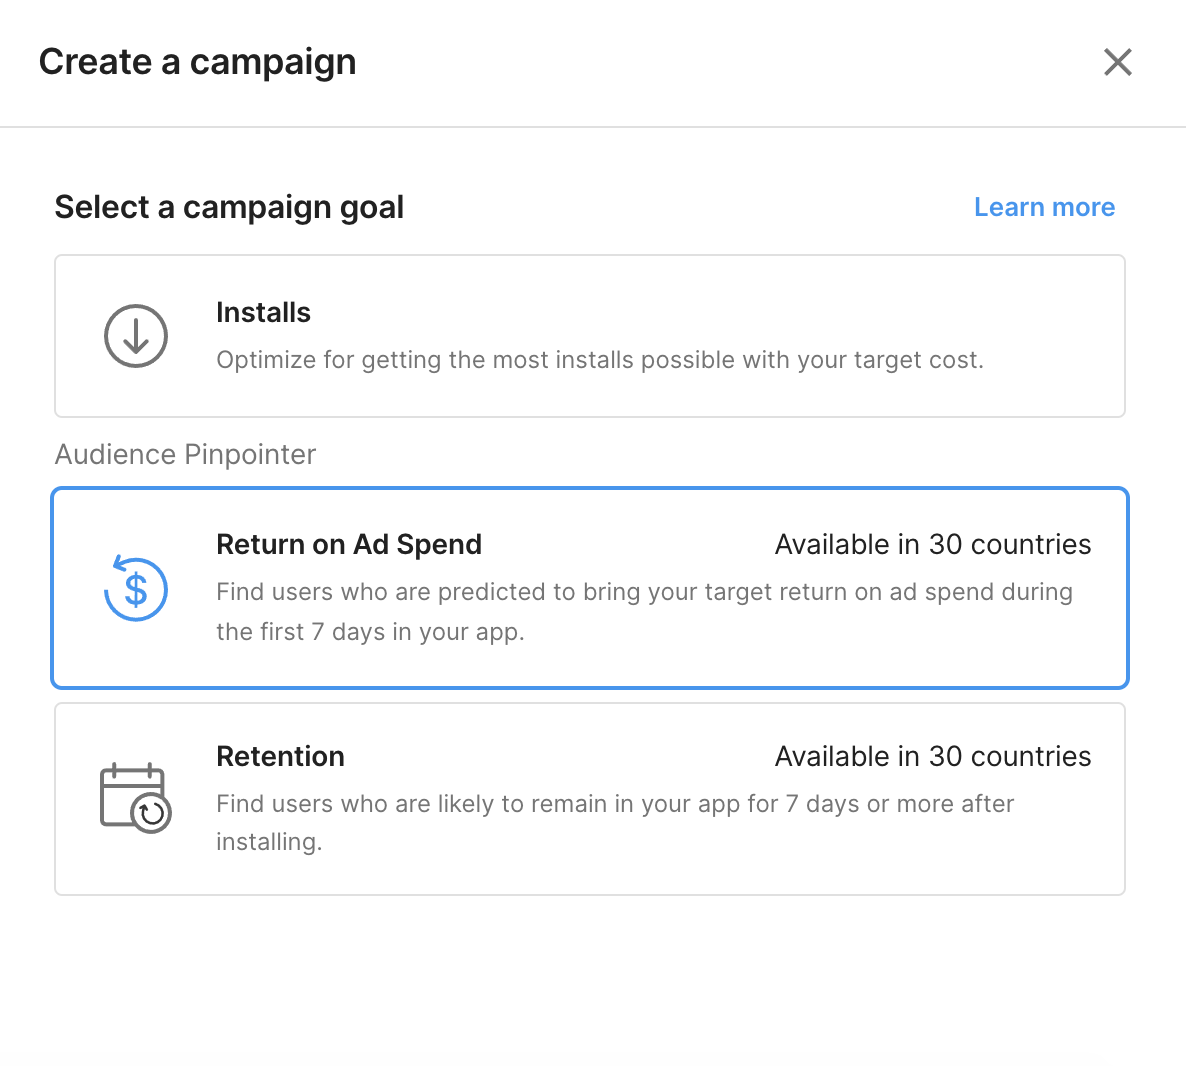 Create Audience Pinpointer campaign